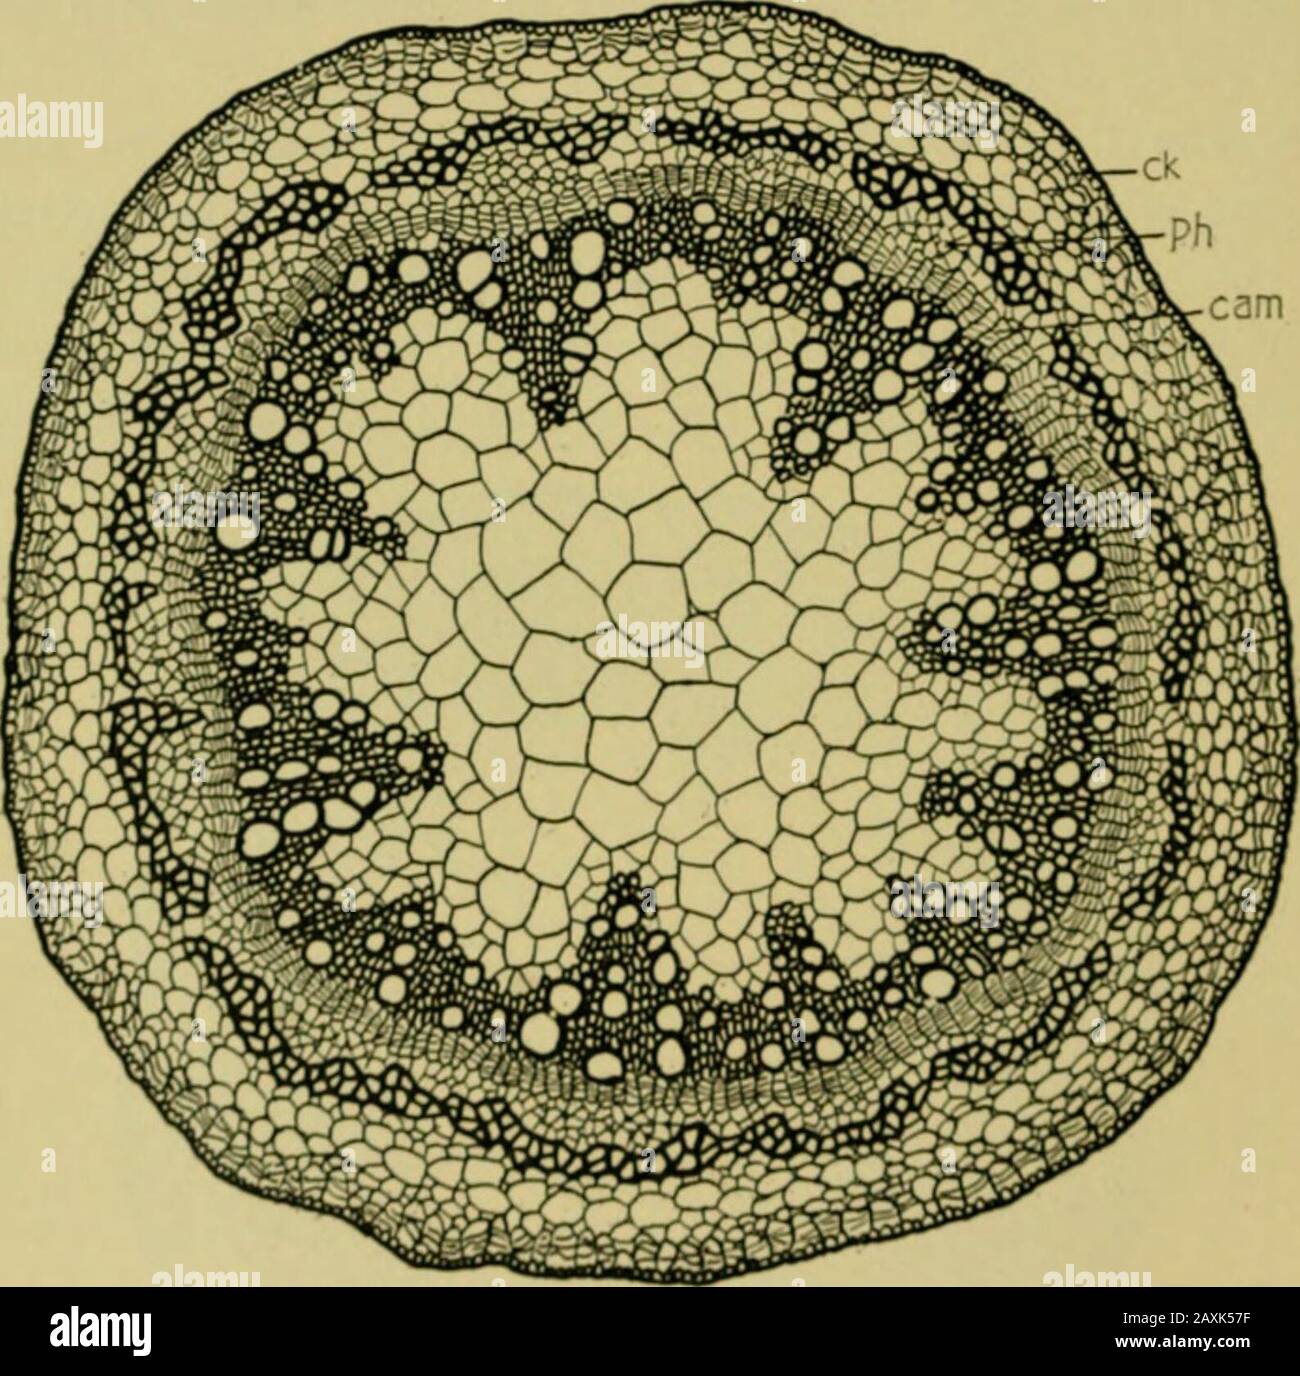 Nature and development of plants . cam Fig. 53. Cross-section of a stem of castor bean in which the formationof the cambium zone, cam, as a ring of regular cells, has been completed;p, pith; v, vascular bundles; st, stereome; c, cortex. Compare Fig. 39.—H. O. Hanson. THE CAMBIUM ZNE from the cambium. While the vascular bundles are verj smallit will be noticed that the parenchyma cells separating the vascu-lar bundles begin to divide so as to form a line of cells connectingthe cambium of each bundle (Fig. 52). In some cases thesedivisions are at firsl somewhal irregular but soon the growthresul Stock Photo